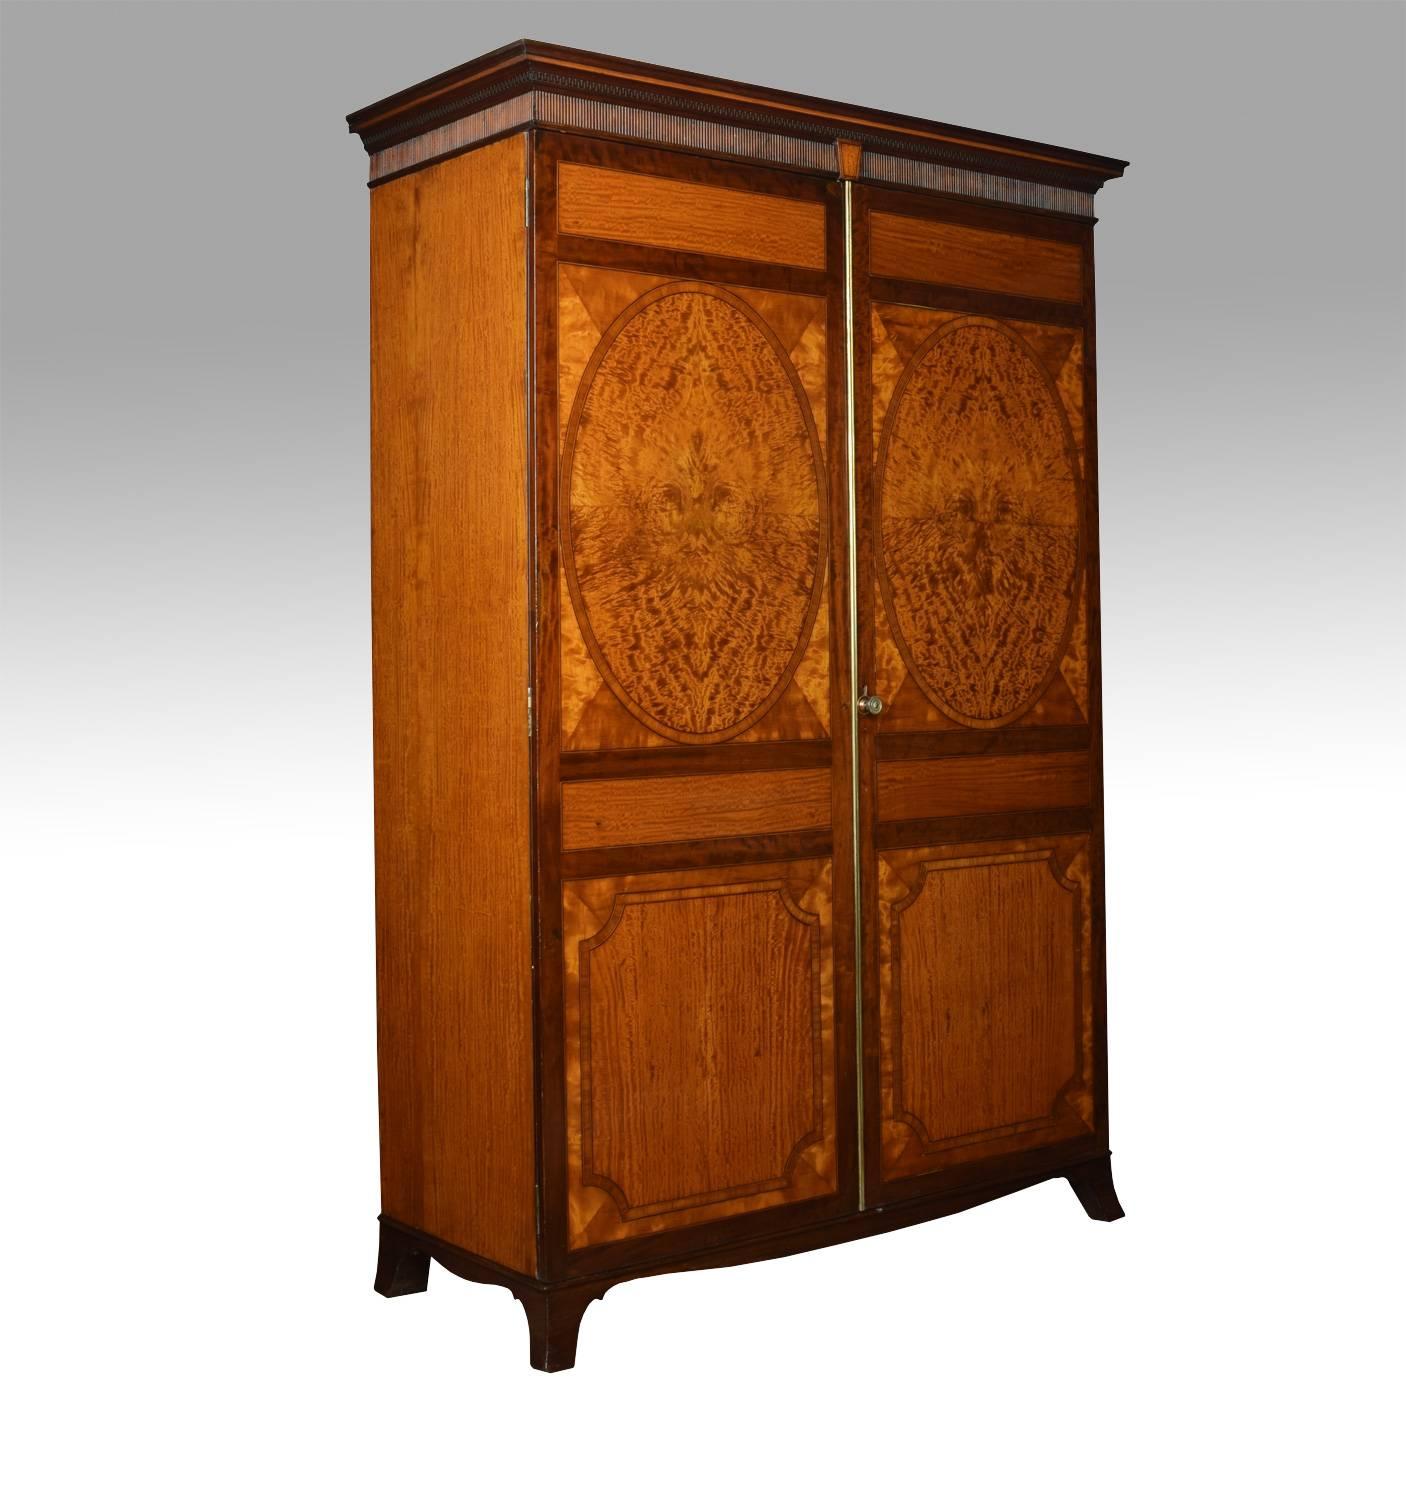 Satinwood two-door wardrobe, the moulded cornice, above two oval inlaid panelled doors, opening to reveal large hanging area. All raised up on shaped bracket feet

Dimensions
Height 81.5 inches
Width 64 inches
Depth 24 inches.